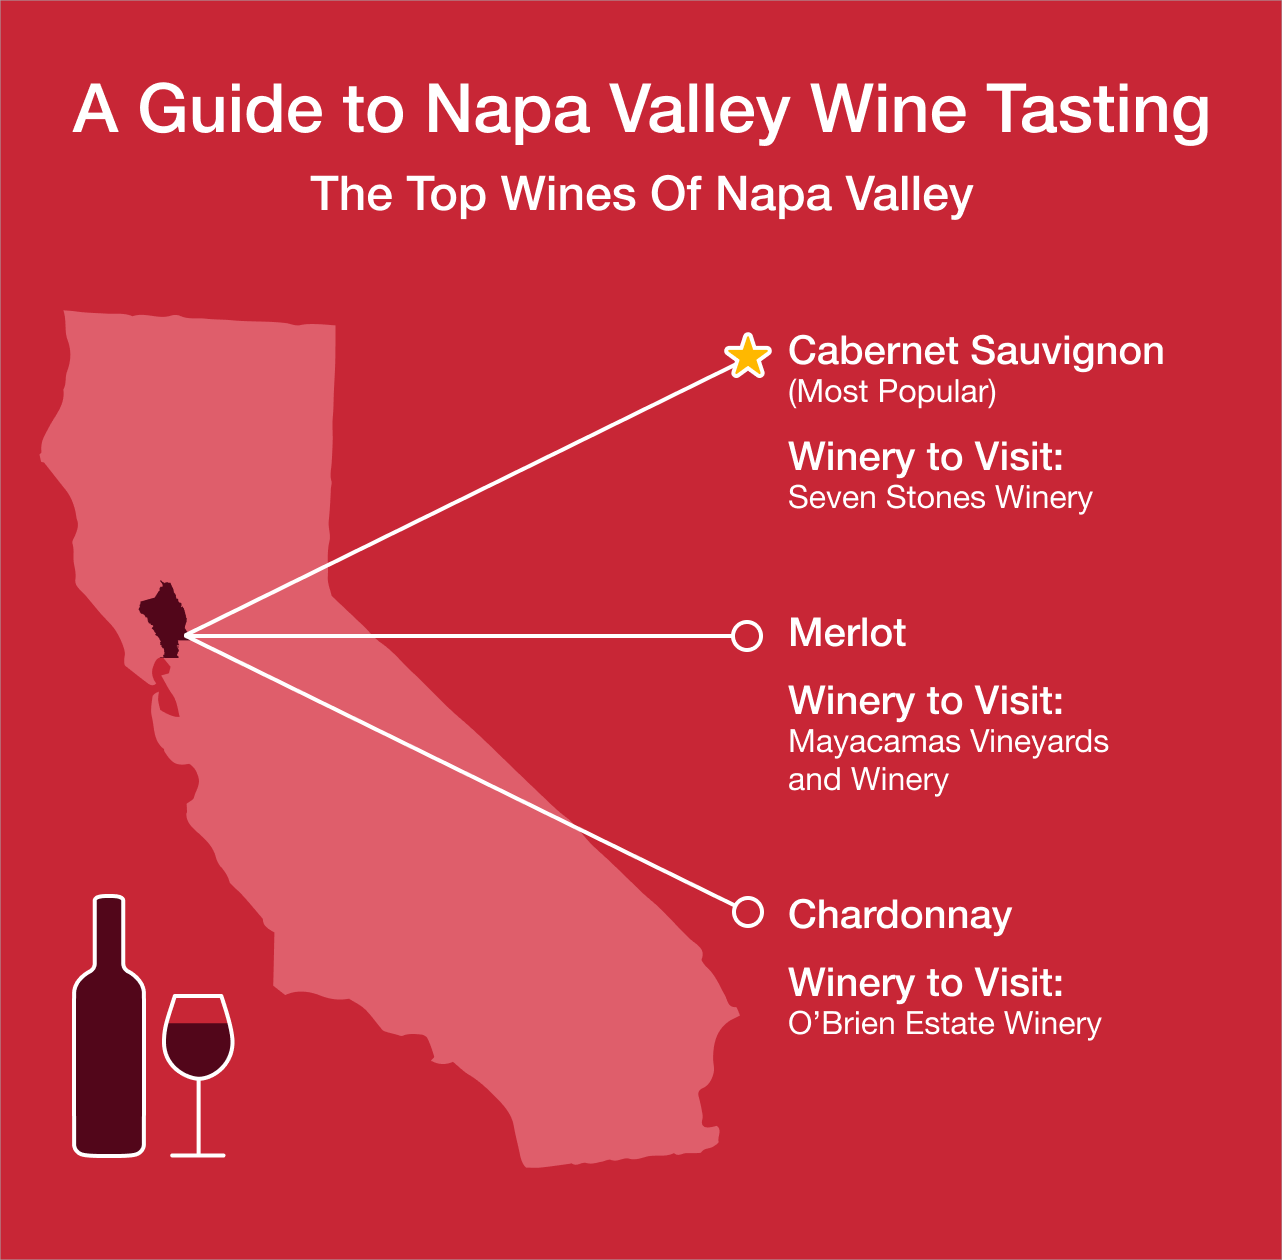 A Guide to Napa Wine Tasting Infographic